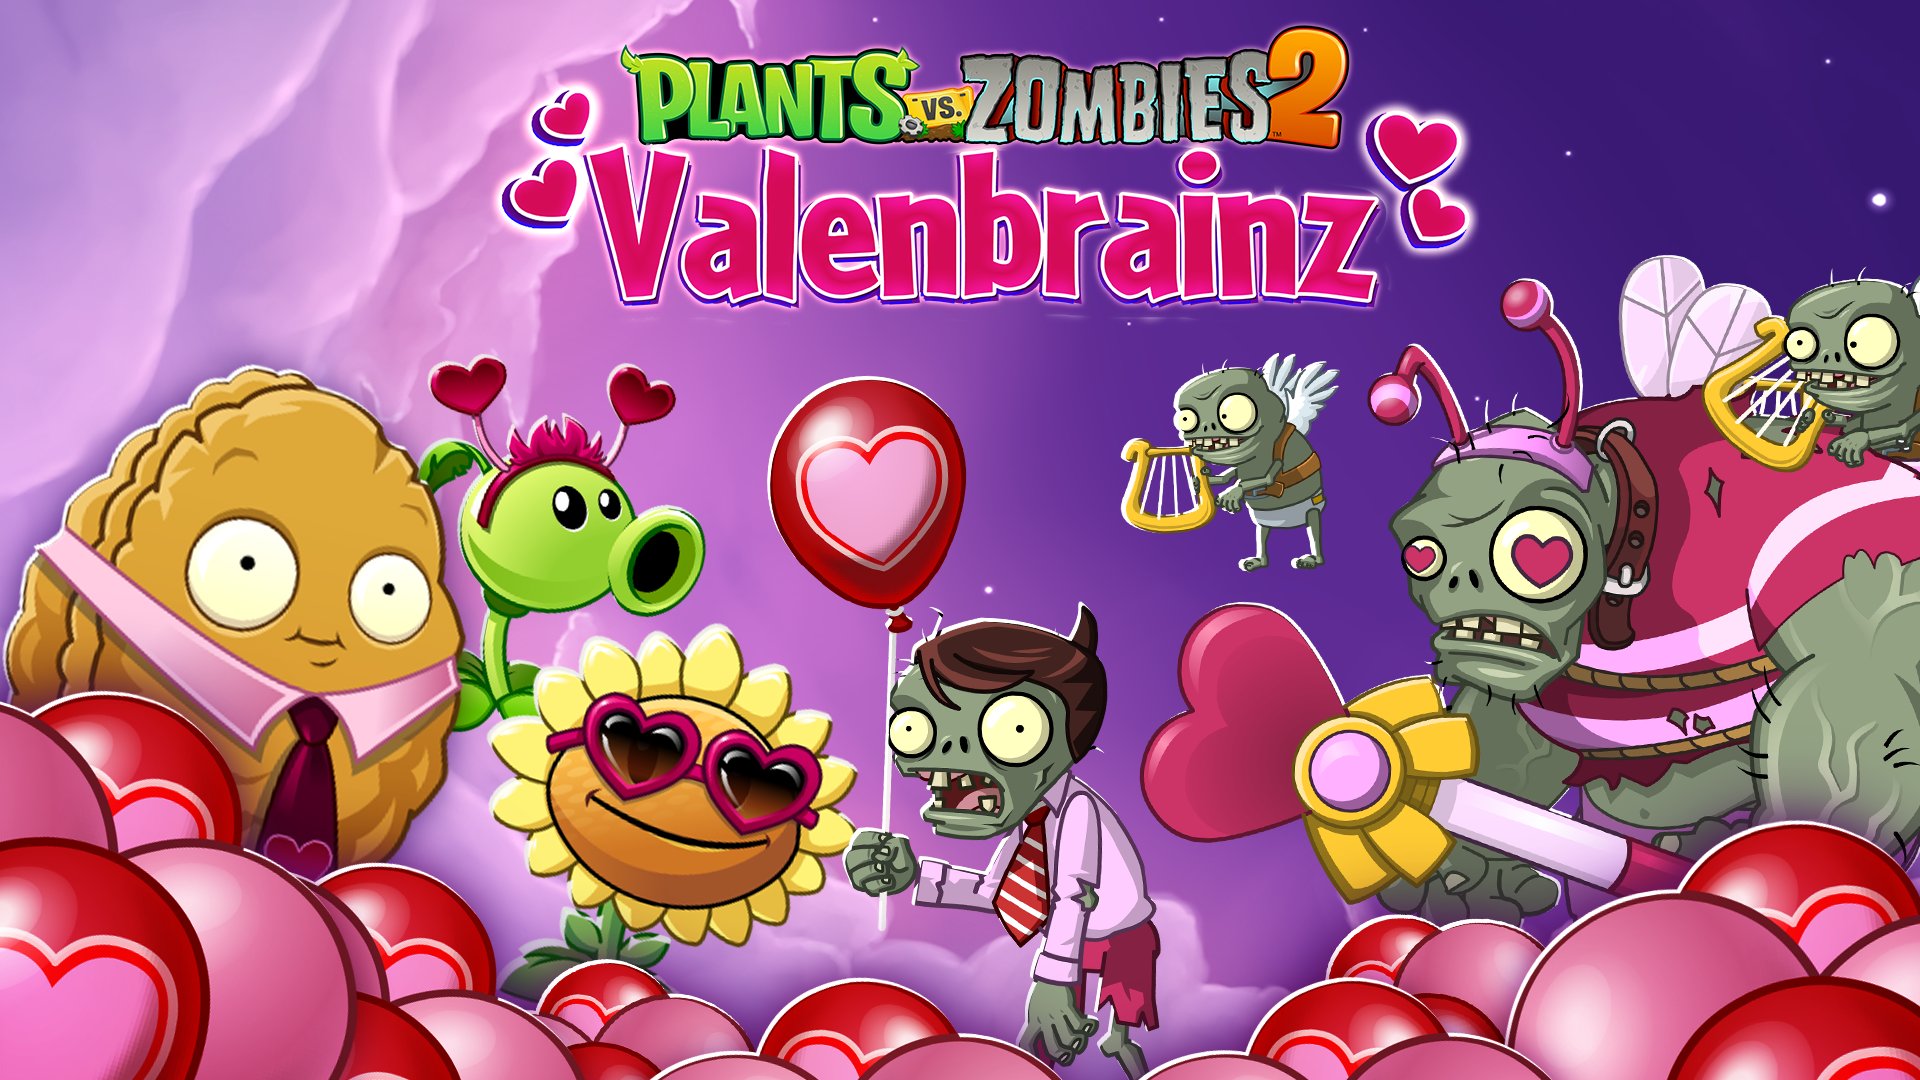 Pl🌲nts vs. Z🧠mbies on X: 💕 Its #Valenbrainz time! 💖 The loveliest time  of year obvs! Don't miss out on it in #PvZ2 or else you may end up  lonely 😥  /